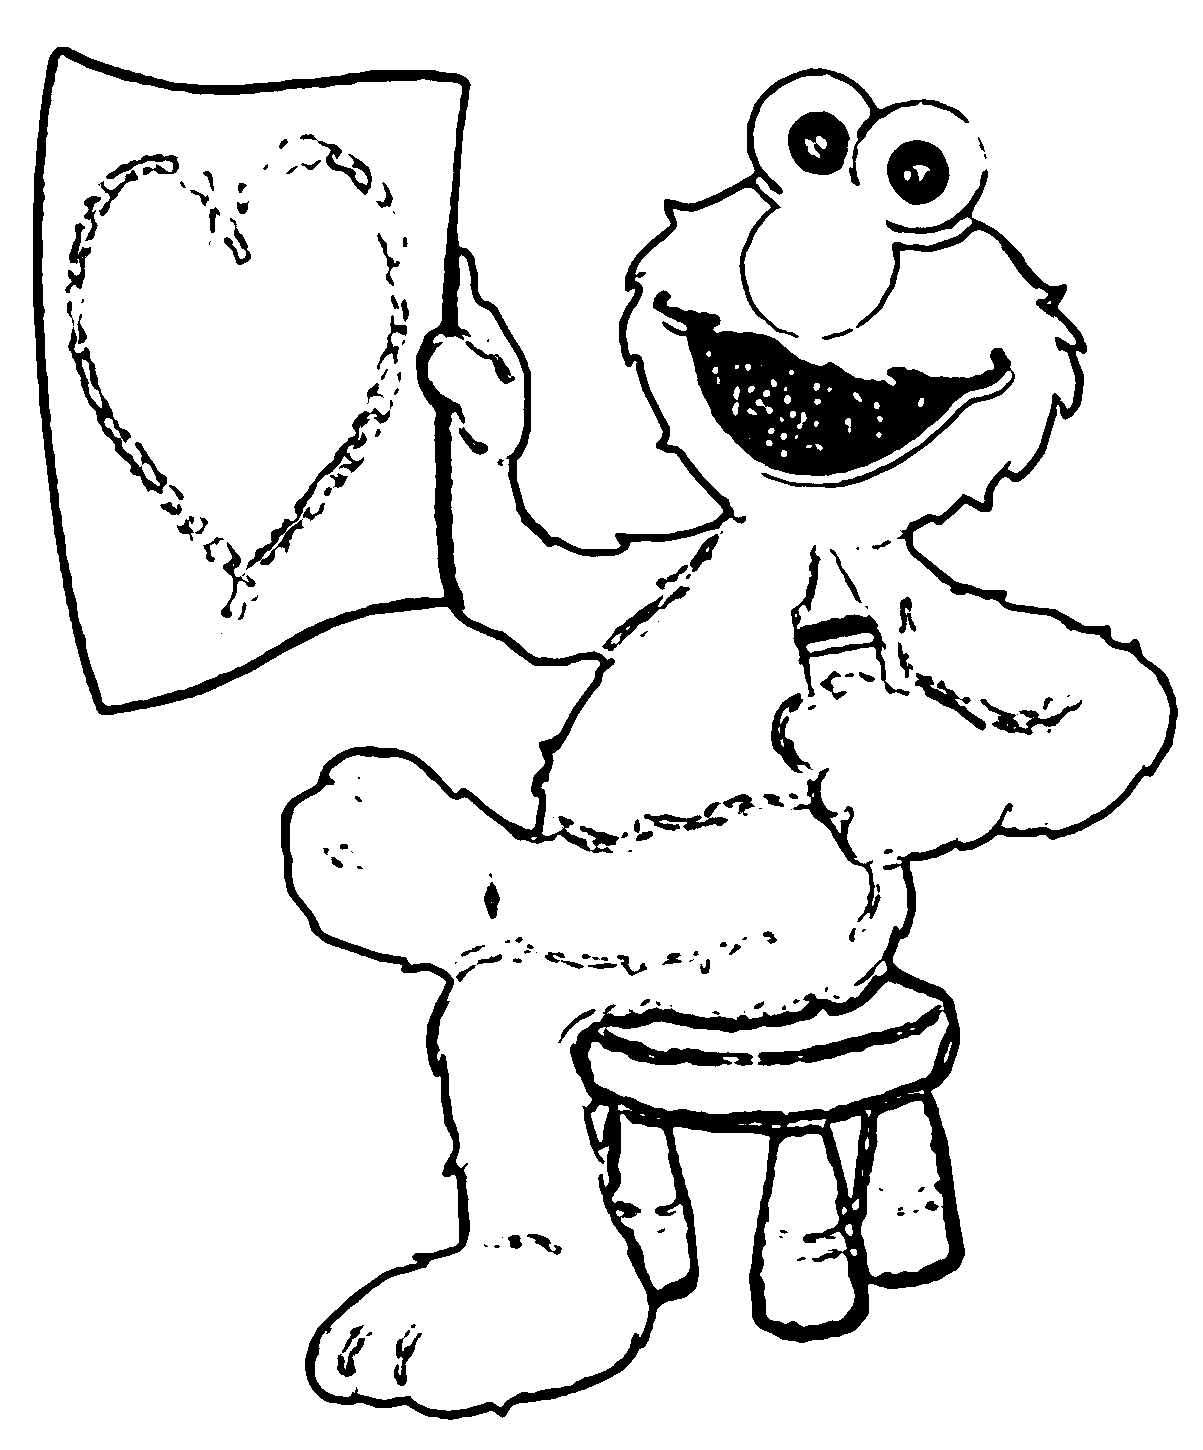 Elmo Heart Sesame Street Coloring Page | Wecoloringpage